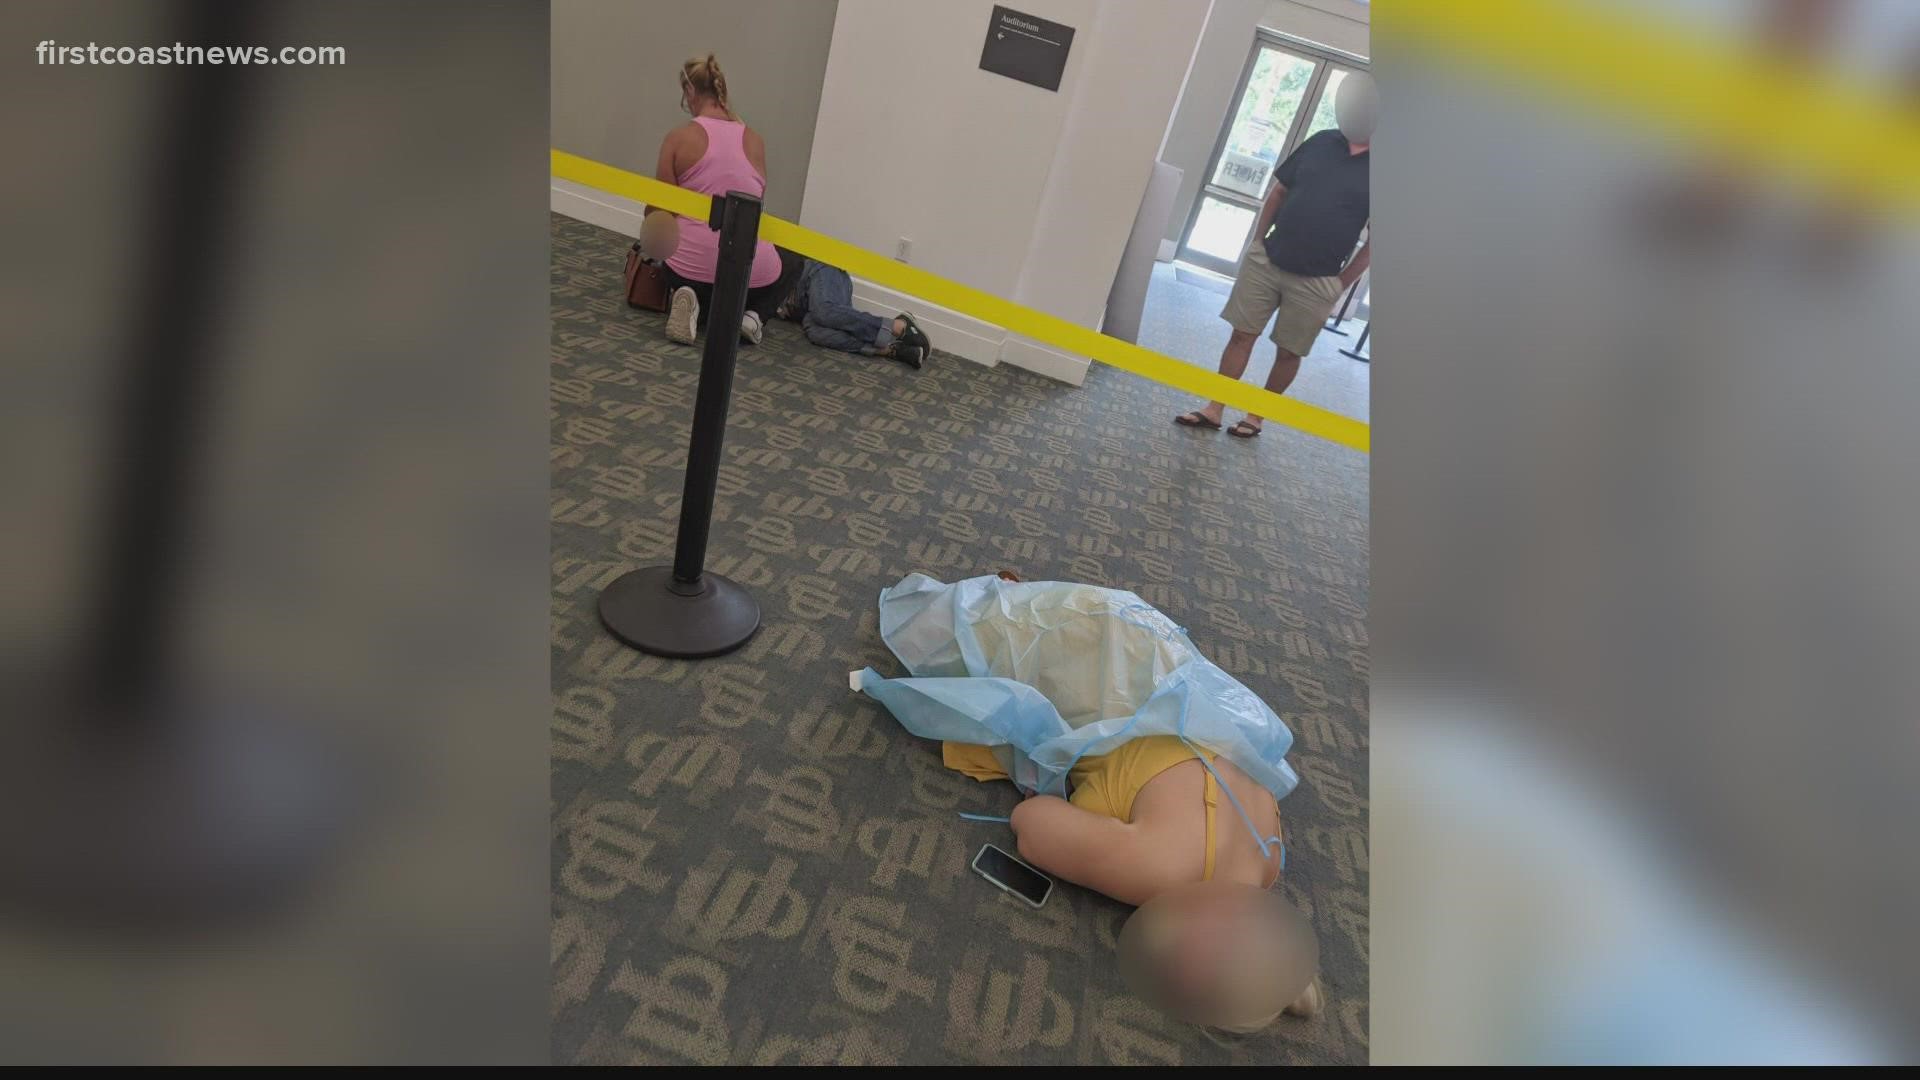 Man who took picture of patients lying on the ground at Jacksonville monoclonal treatment center talks to First Coast News